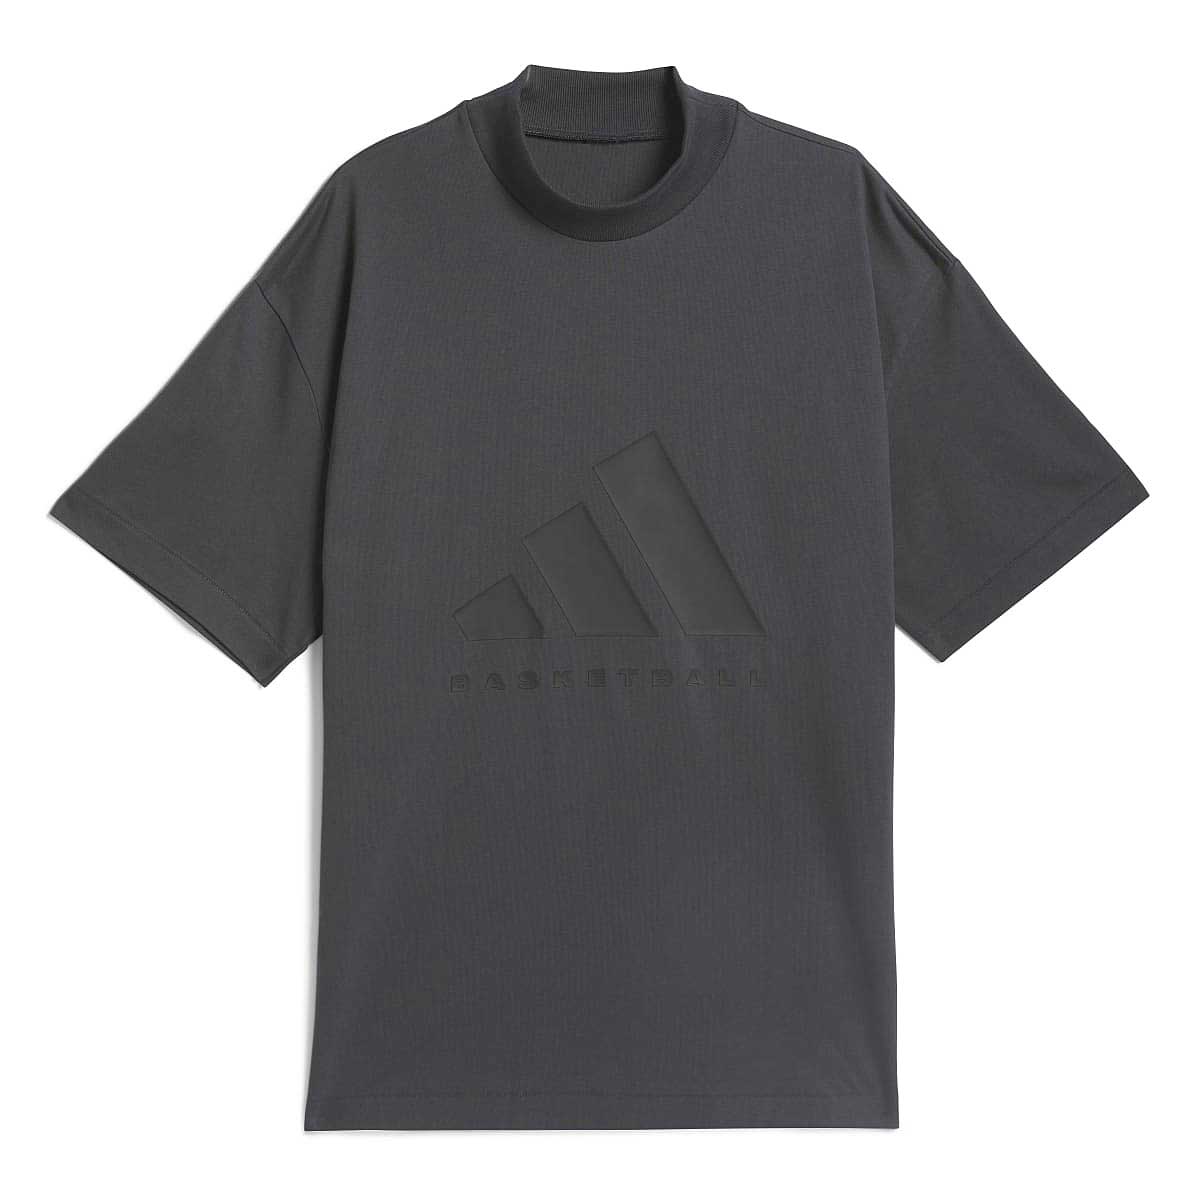 Image of Adidas Chapter 1 Basketball T-shirt, Carbon/carbon